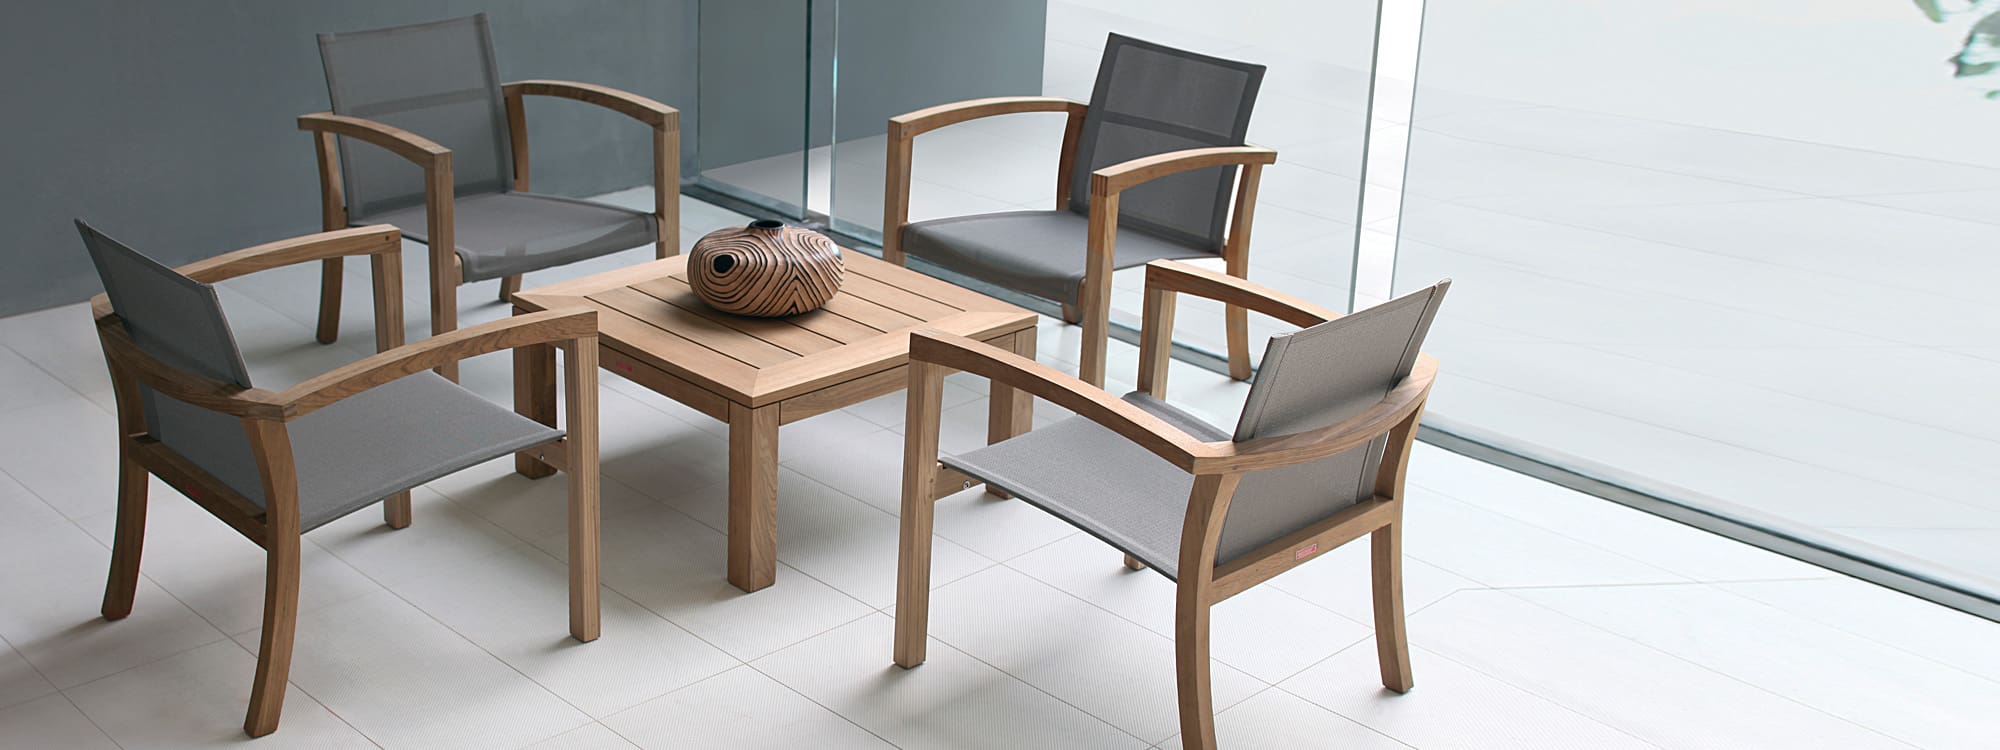 Image of four XQI lounge chairs sat around an XQI square low table by Royal Botania